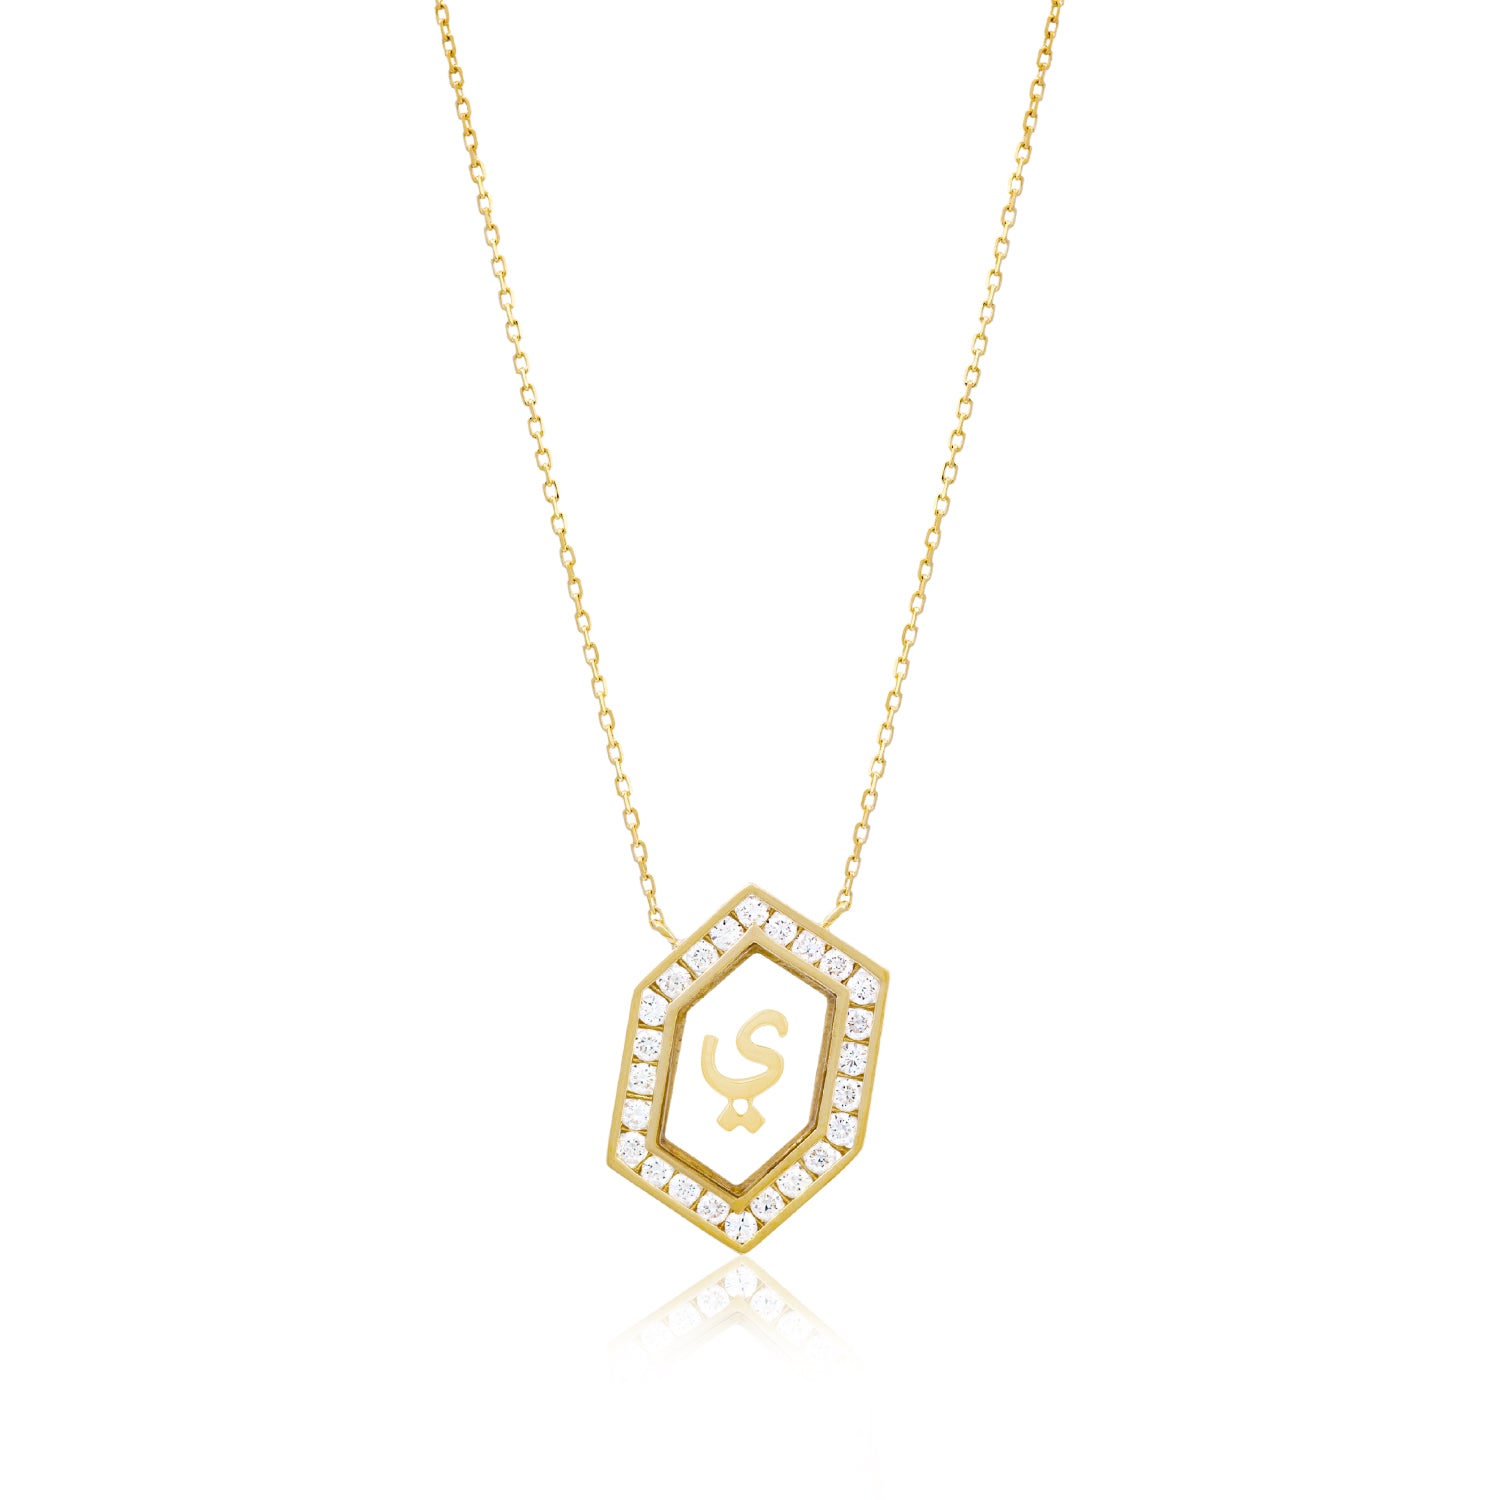 Qamoos 1.0 Letter ي Diamond Necklace in Yellow Gold